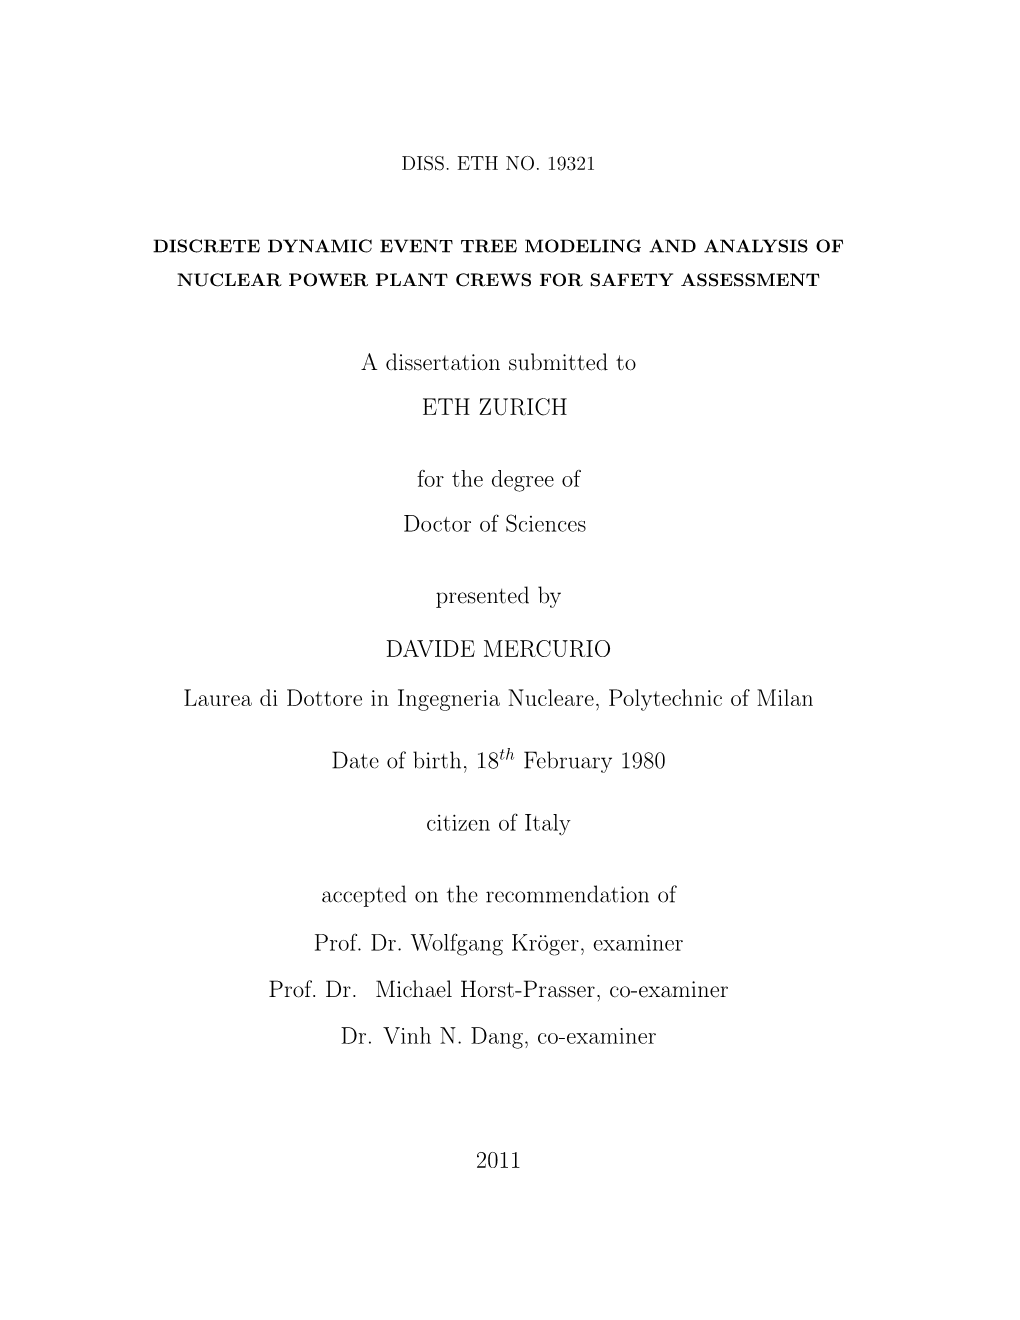 A Dissertation Submitted to ETH ZURICH for the Degree of Doctor Of